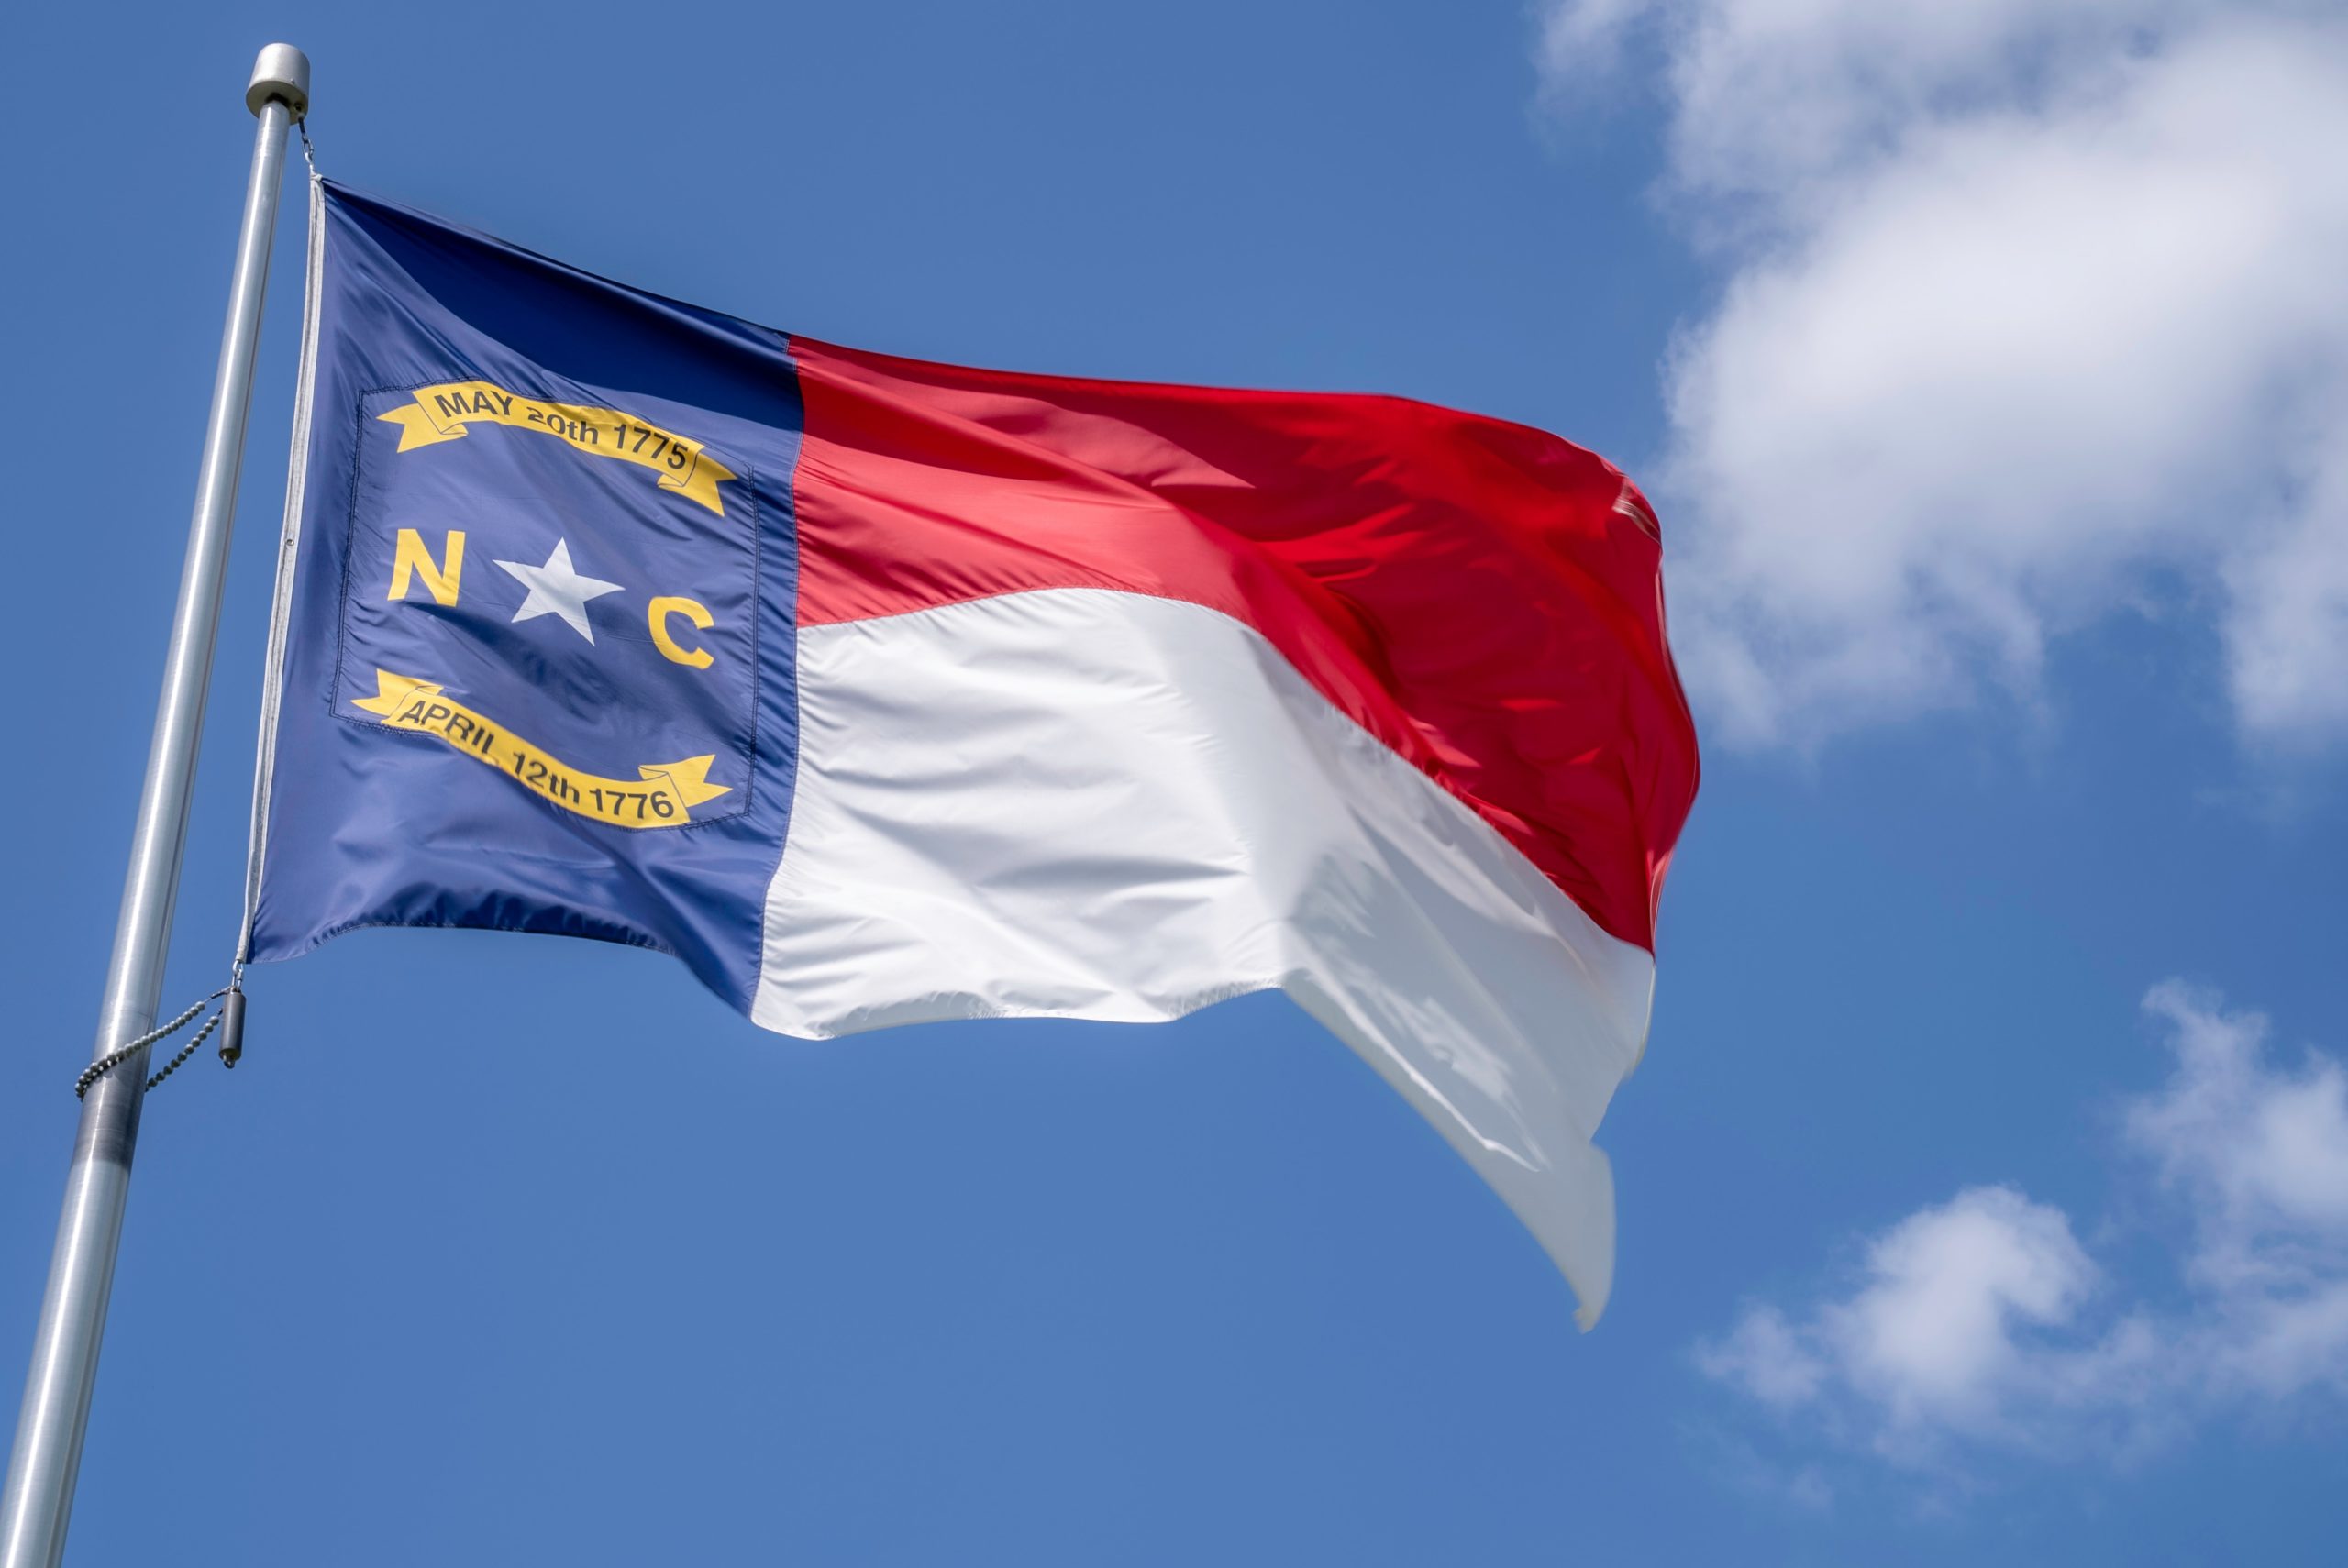 North Carolina’s Opportunity To Ban Health Industry Gag Clauses And Unleash Price Transparency